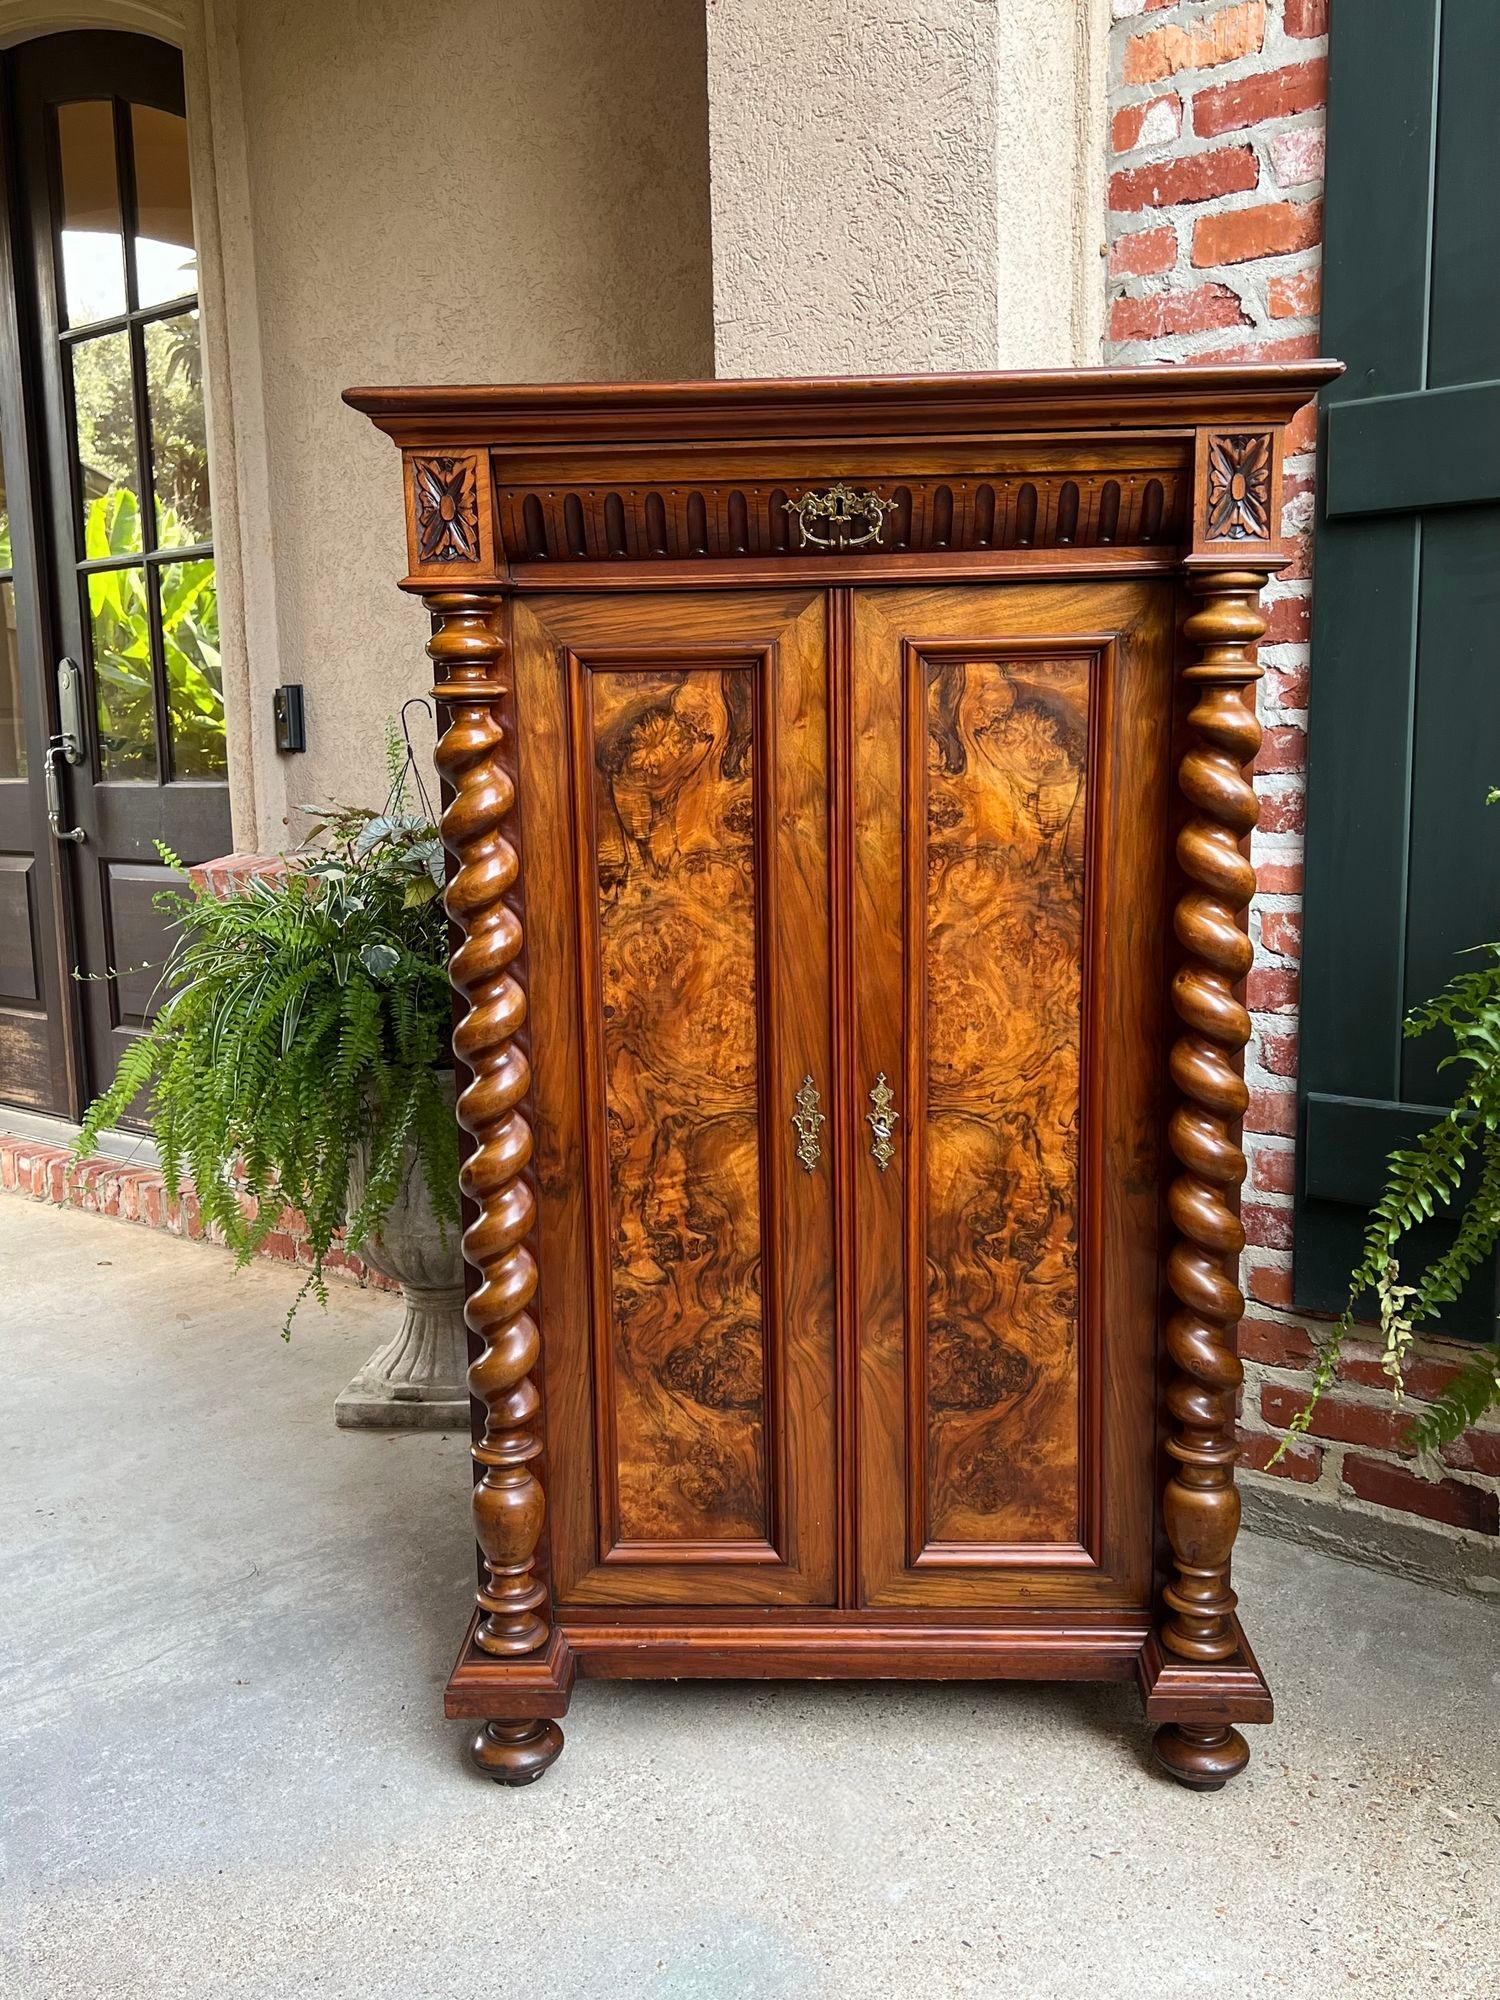 Antique English Cabinet Bookcase Barley Twist Carved Burl Walnut.
Direct from England, a stunning British cabinet, tall and slender, perfect size for any room in your home, with superb burl walnut door panels!!
Upper cabinet has carved corners and a